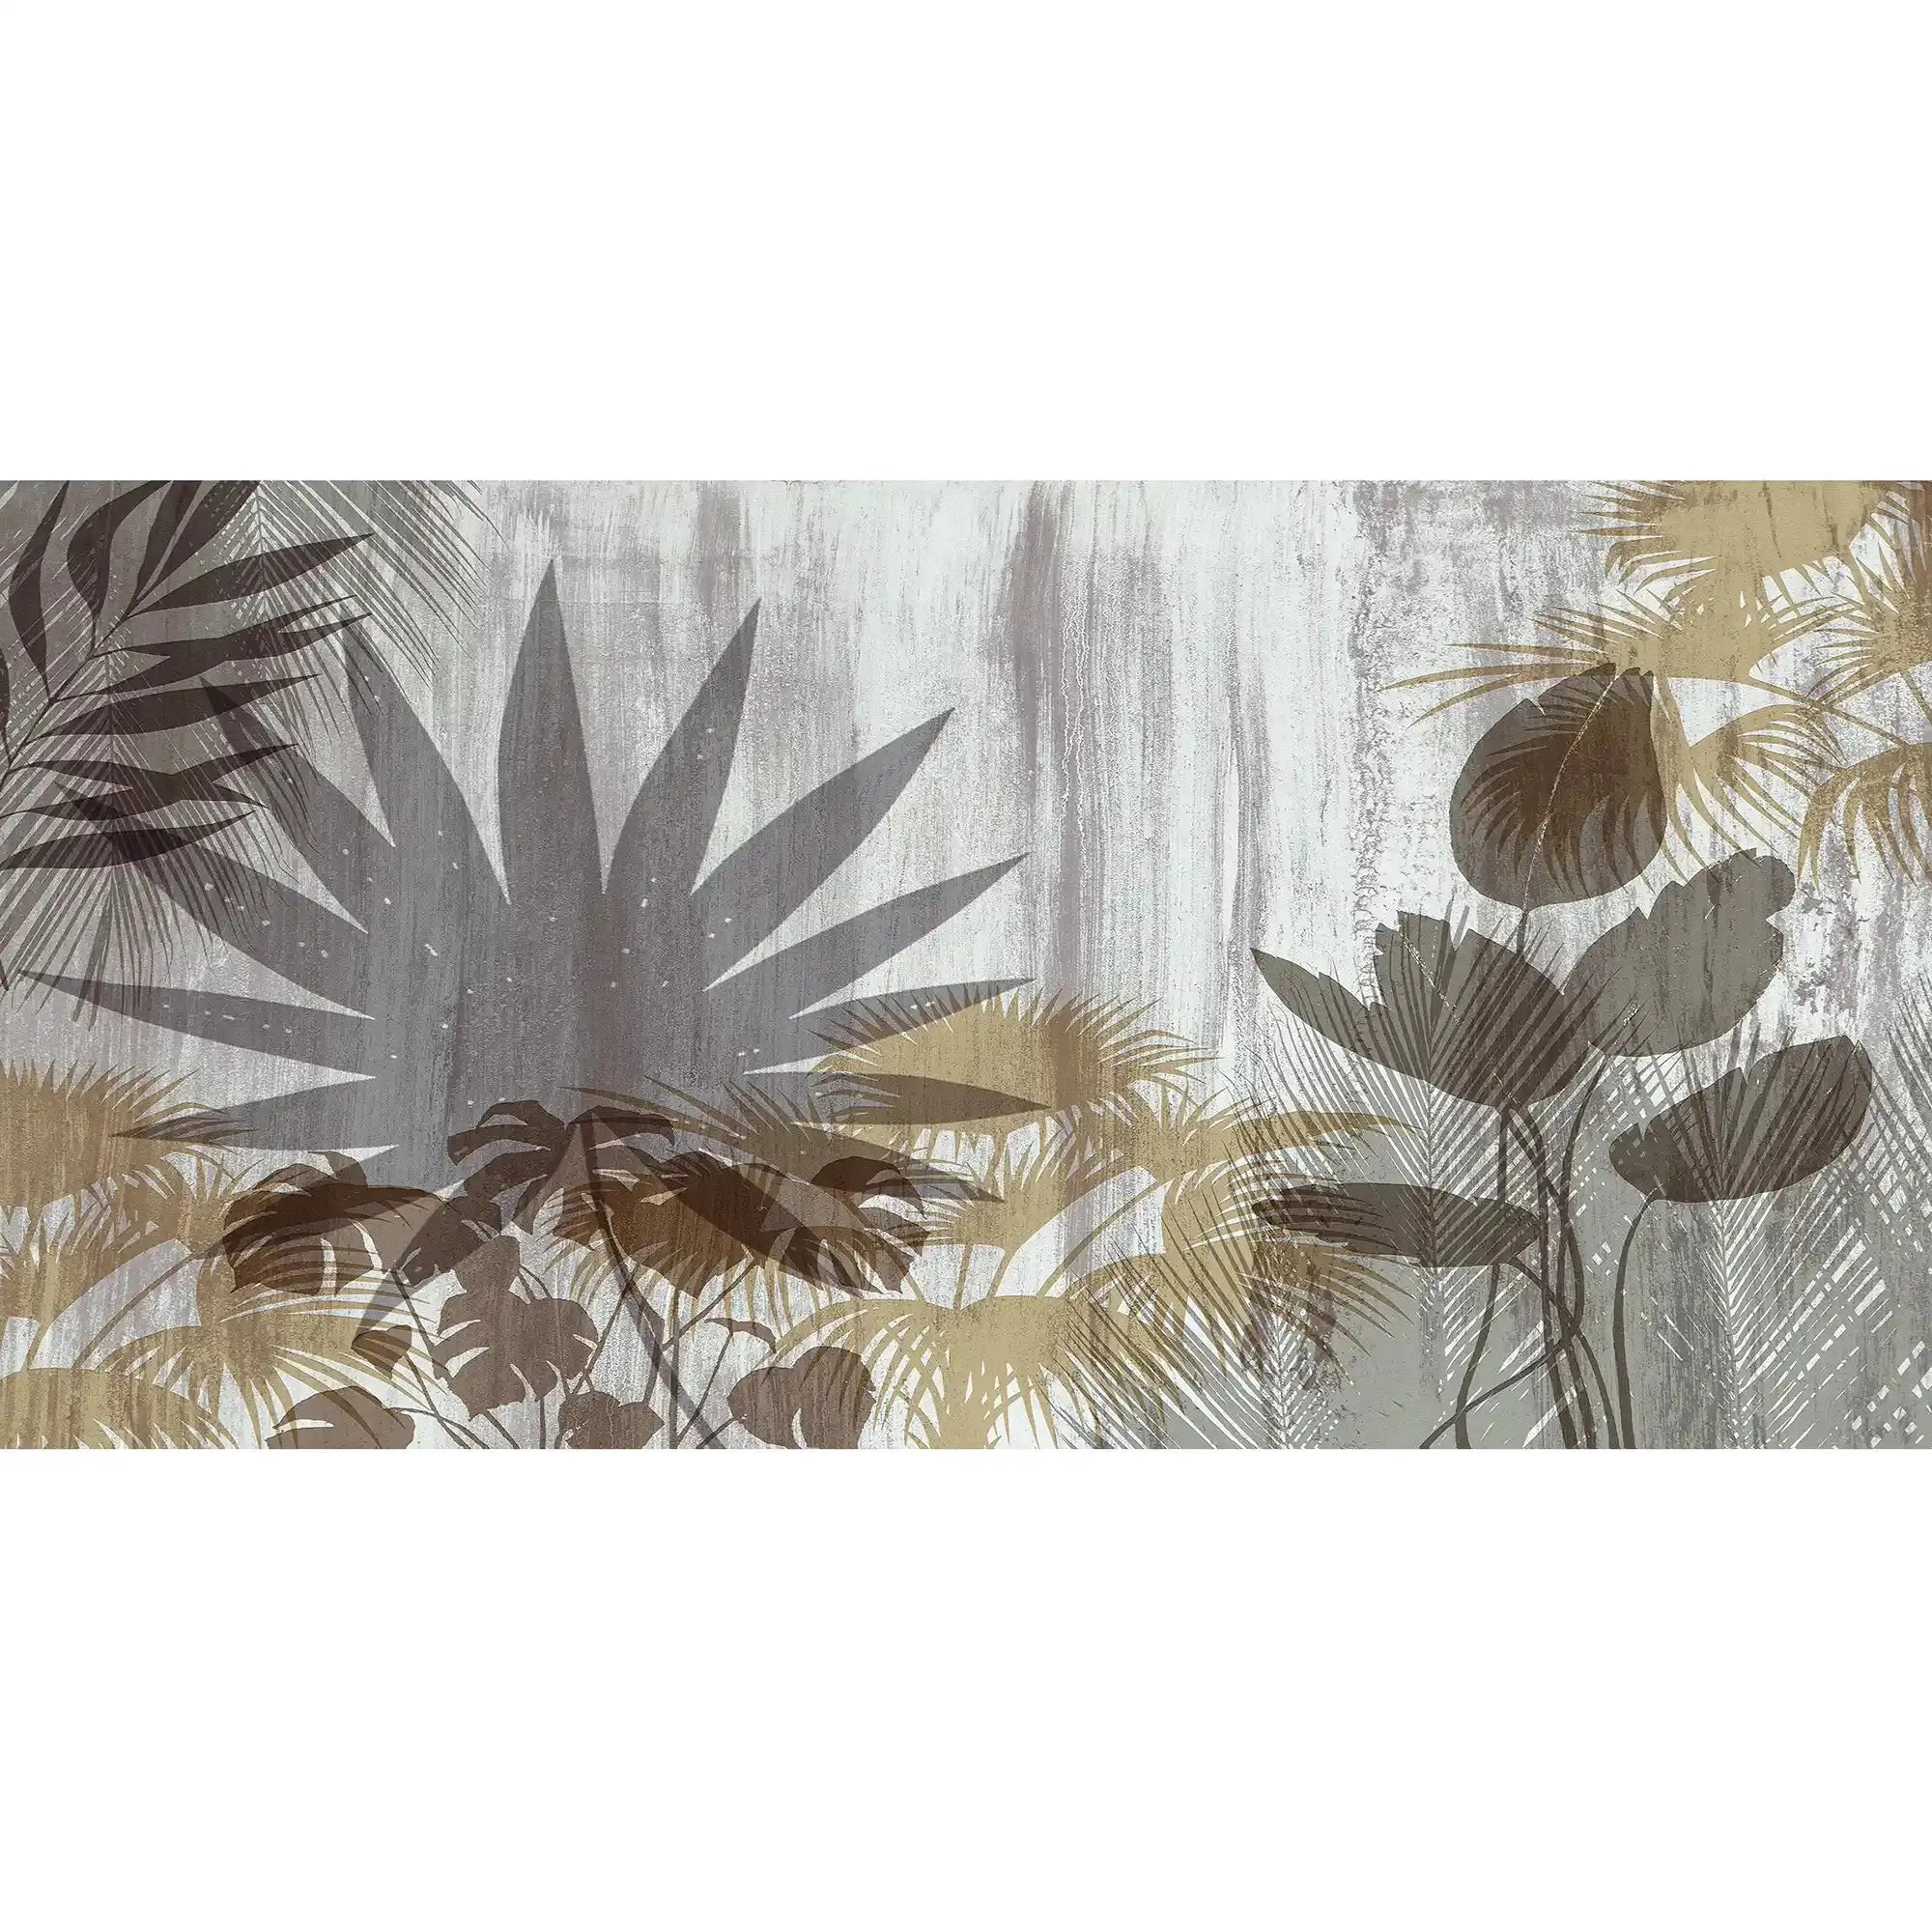 3077-B / Botanical Wall Mural: Peel and Stick Wallpaper with Wild Floral and Plant Motif - Artevella